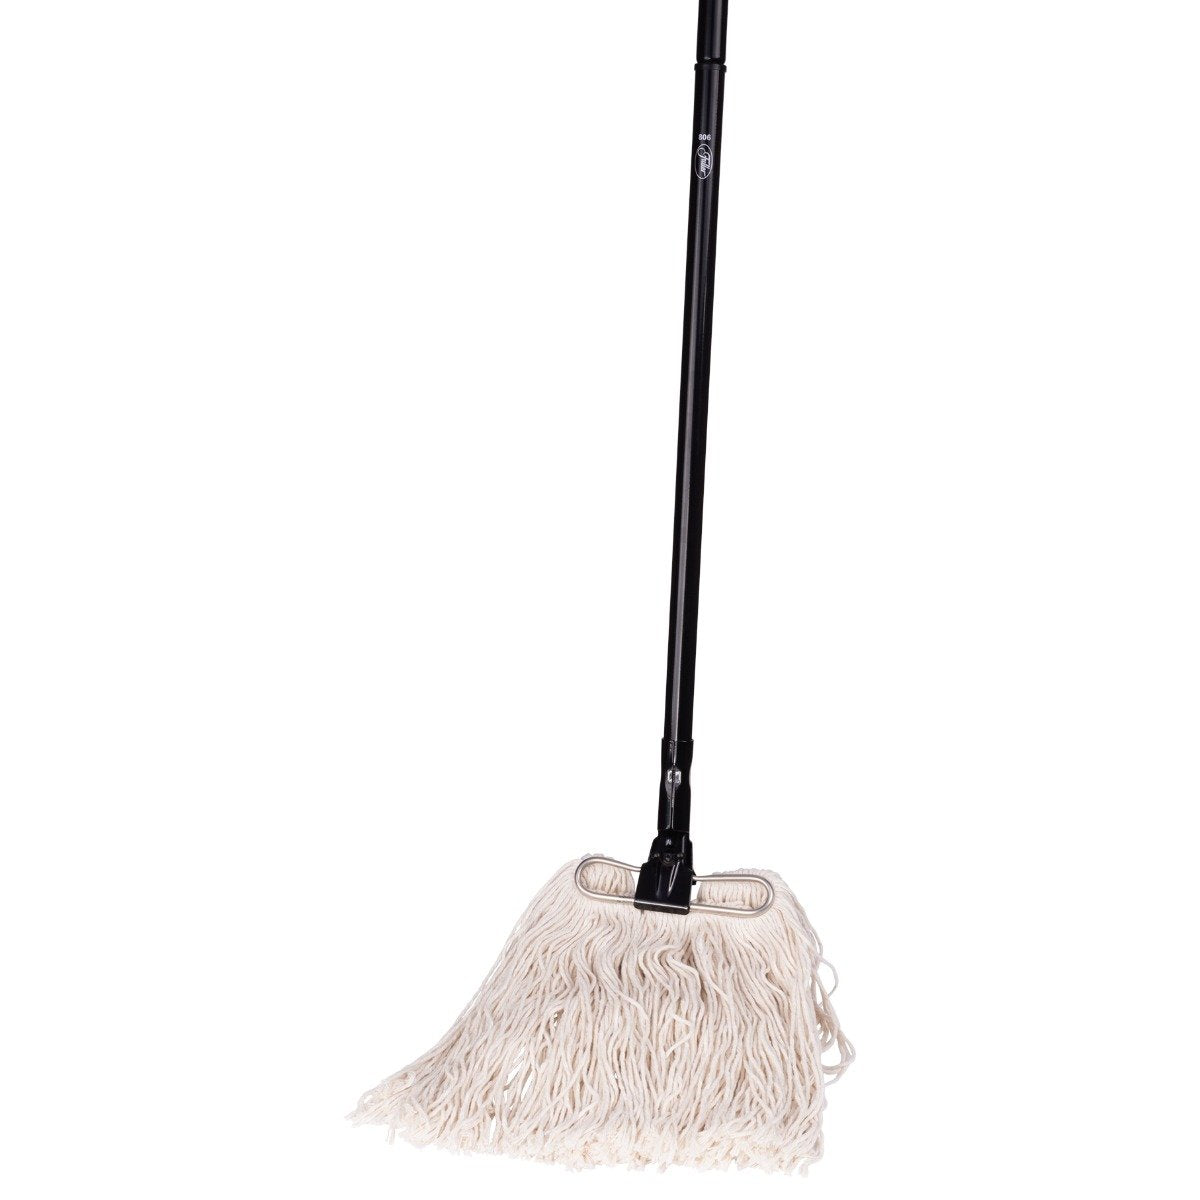 Wet Mop Complete Absorbent Quality Cotton Yarn Floor Cleaner- W/806 Ha -  Mops — Fuller Brush Company